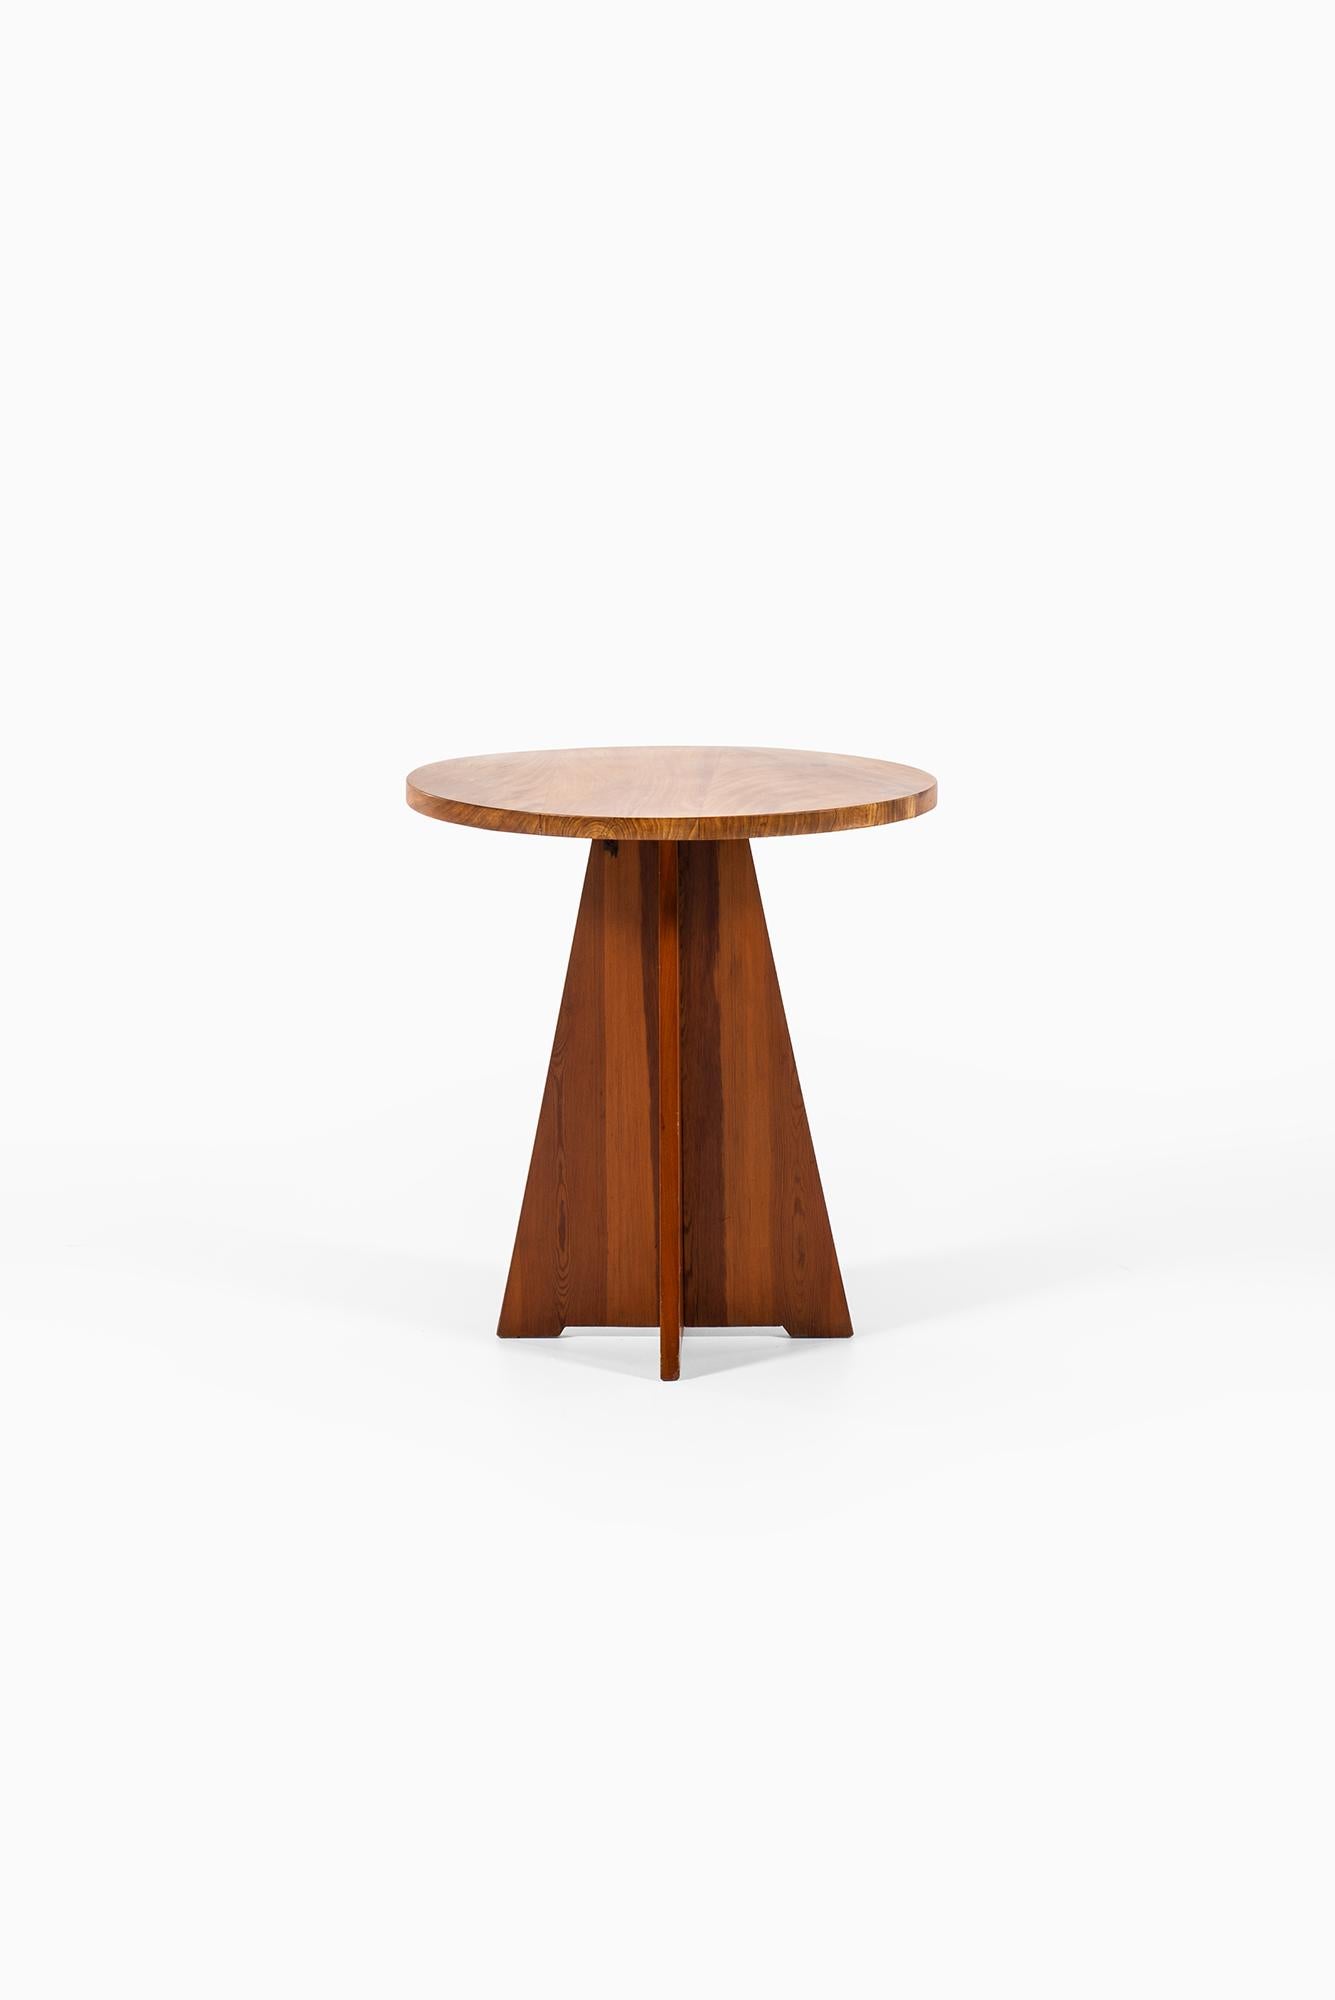 Mid-20th Century Round Side Table in Oregon Pine and Elm